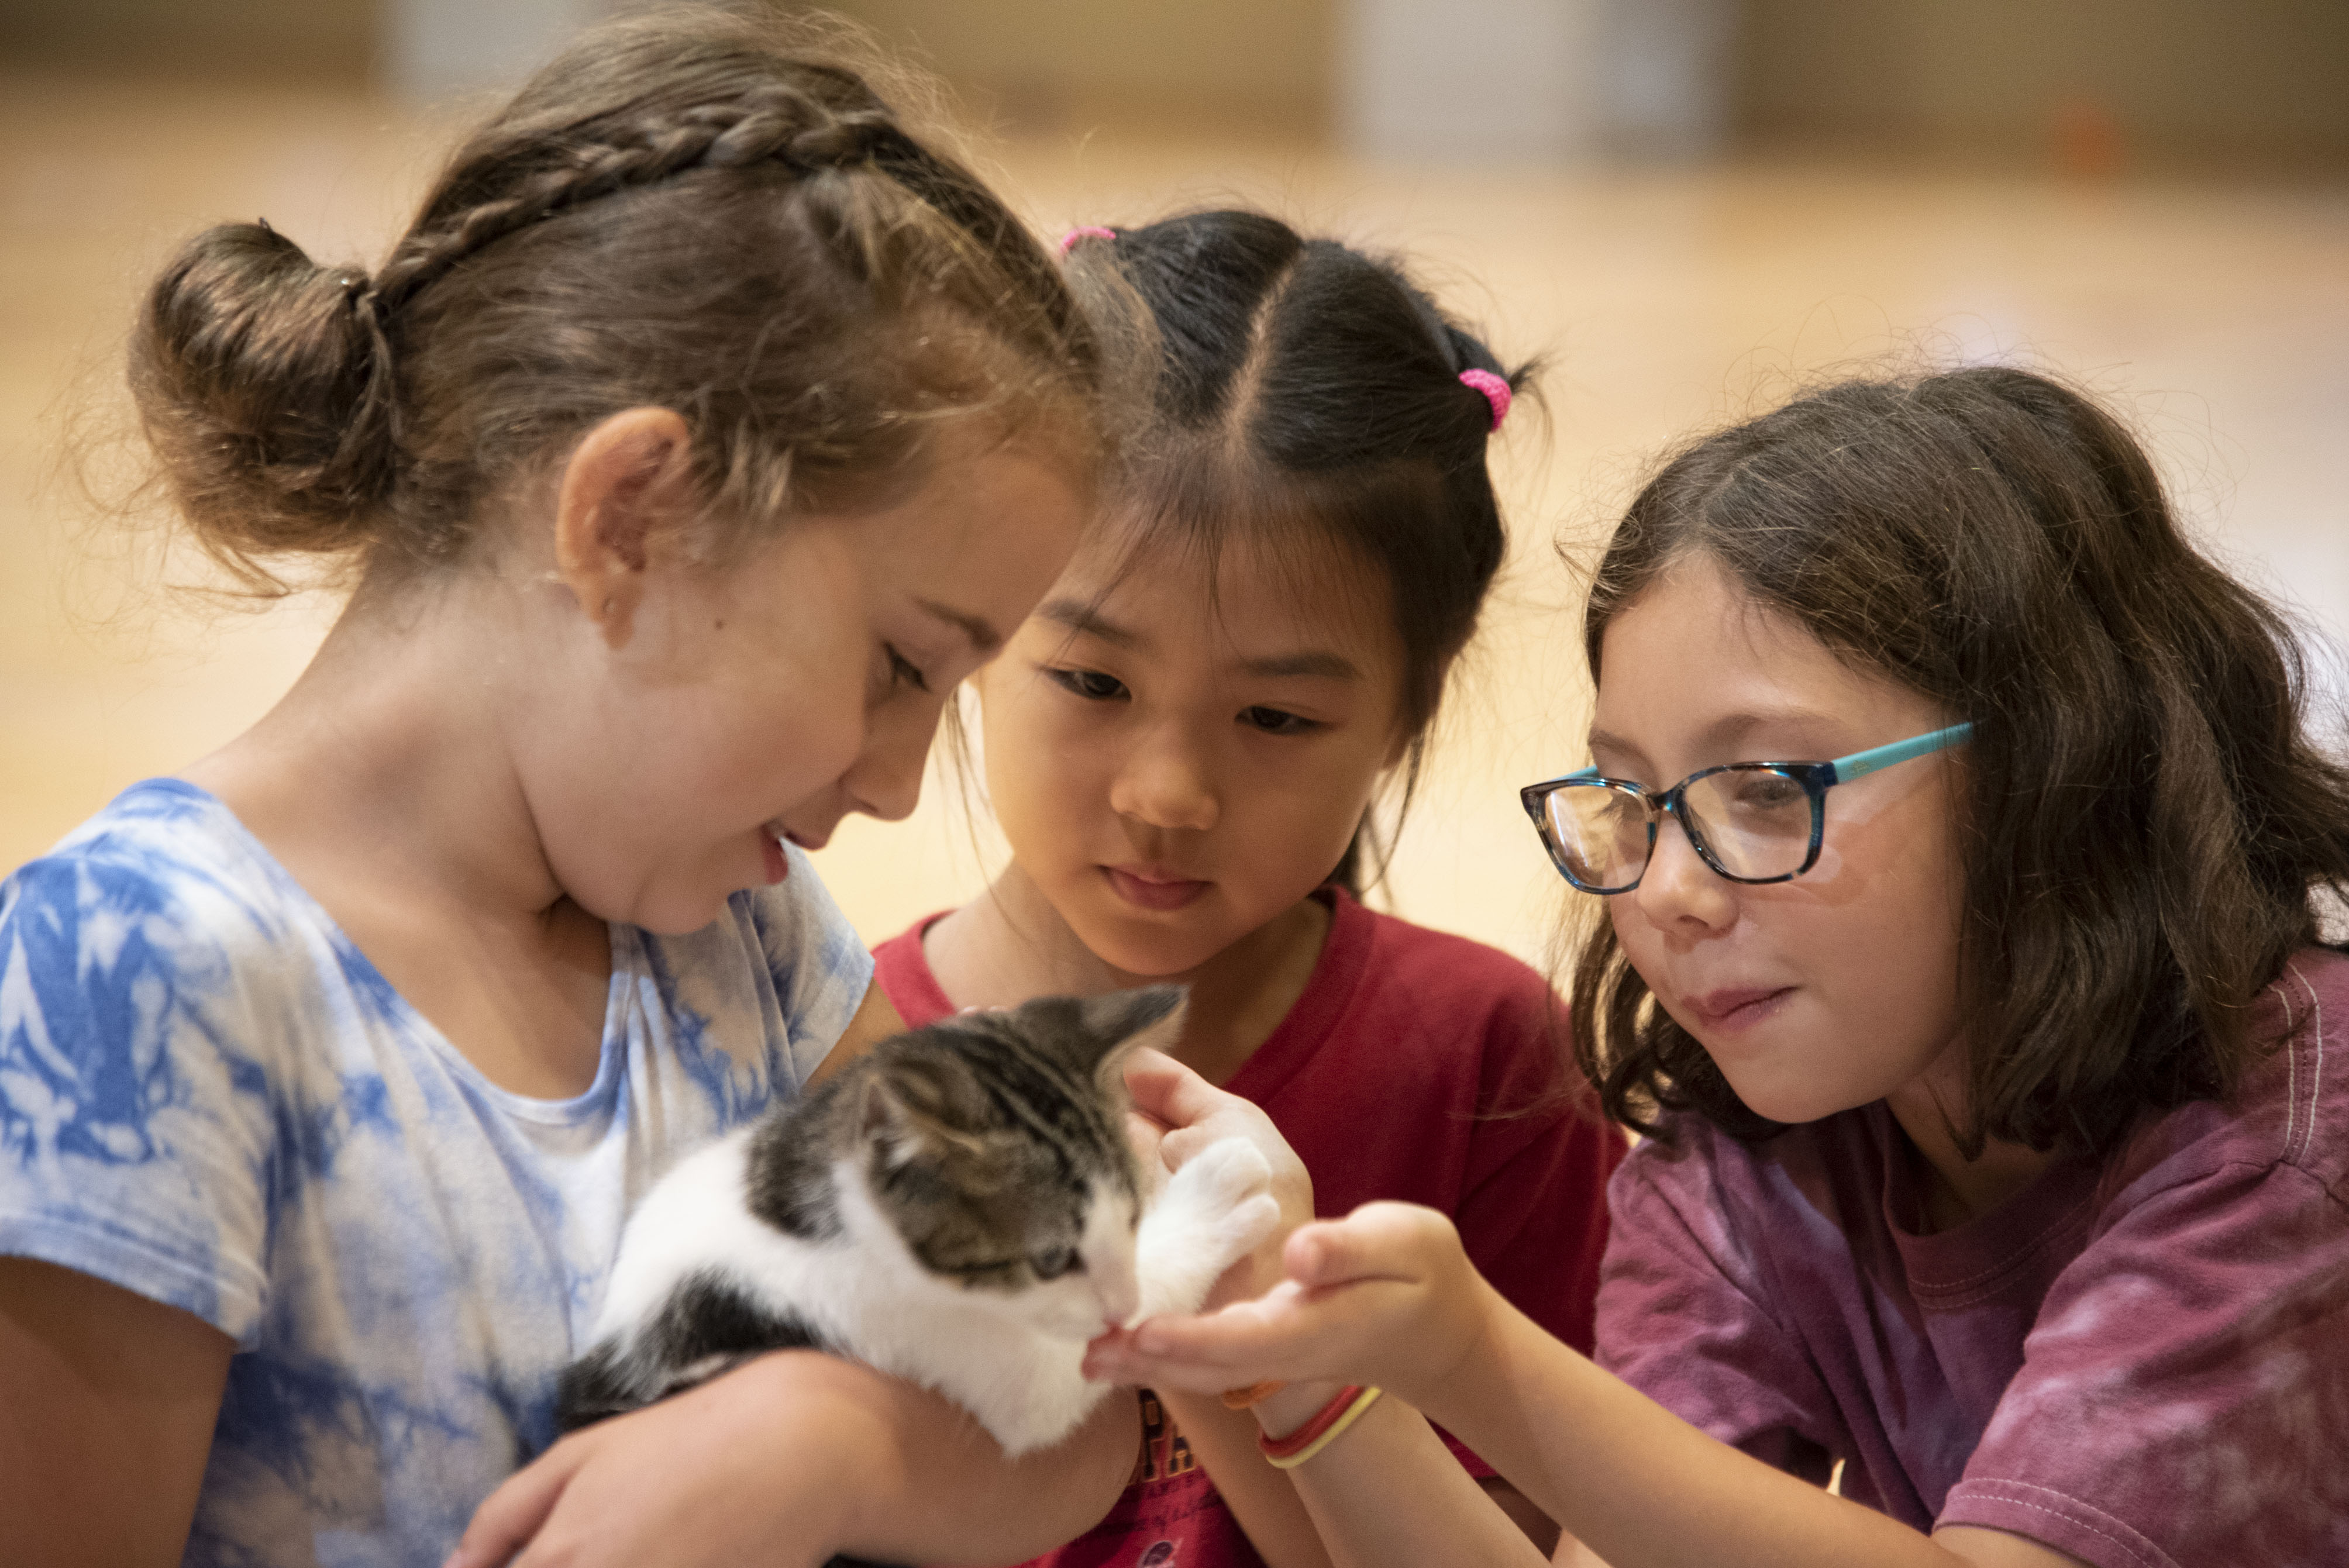 Three young students hold and observe a kitten